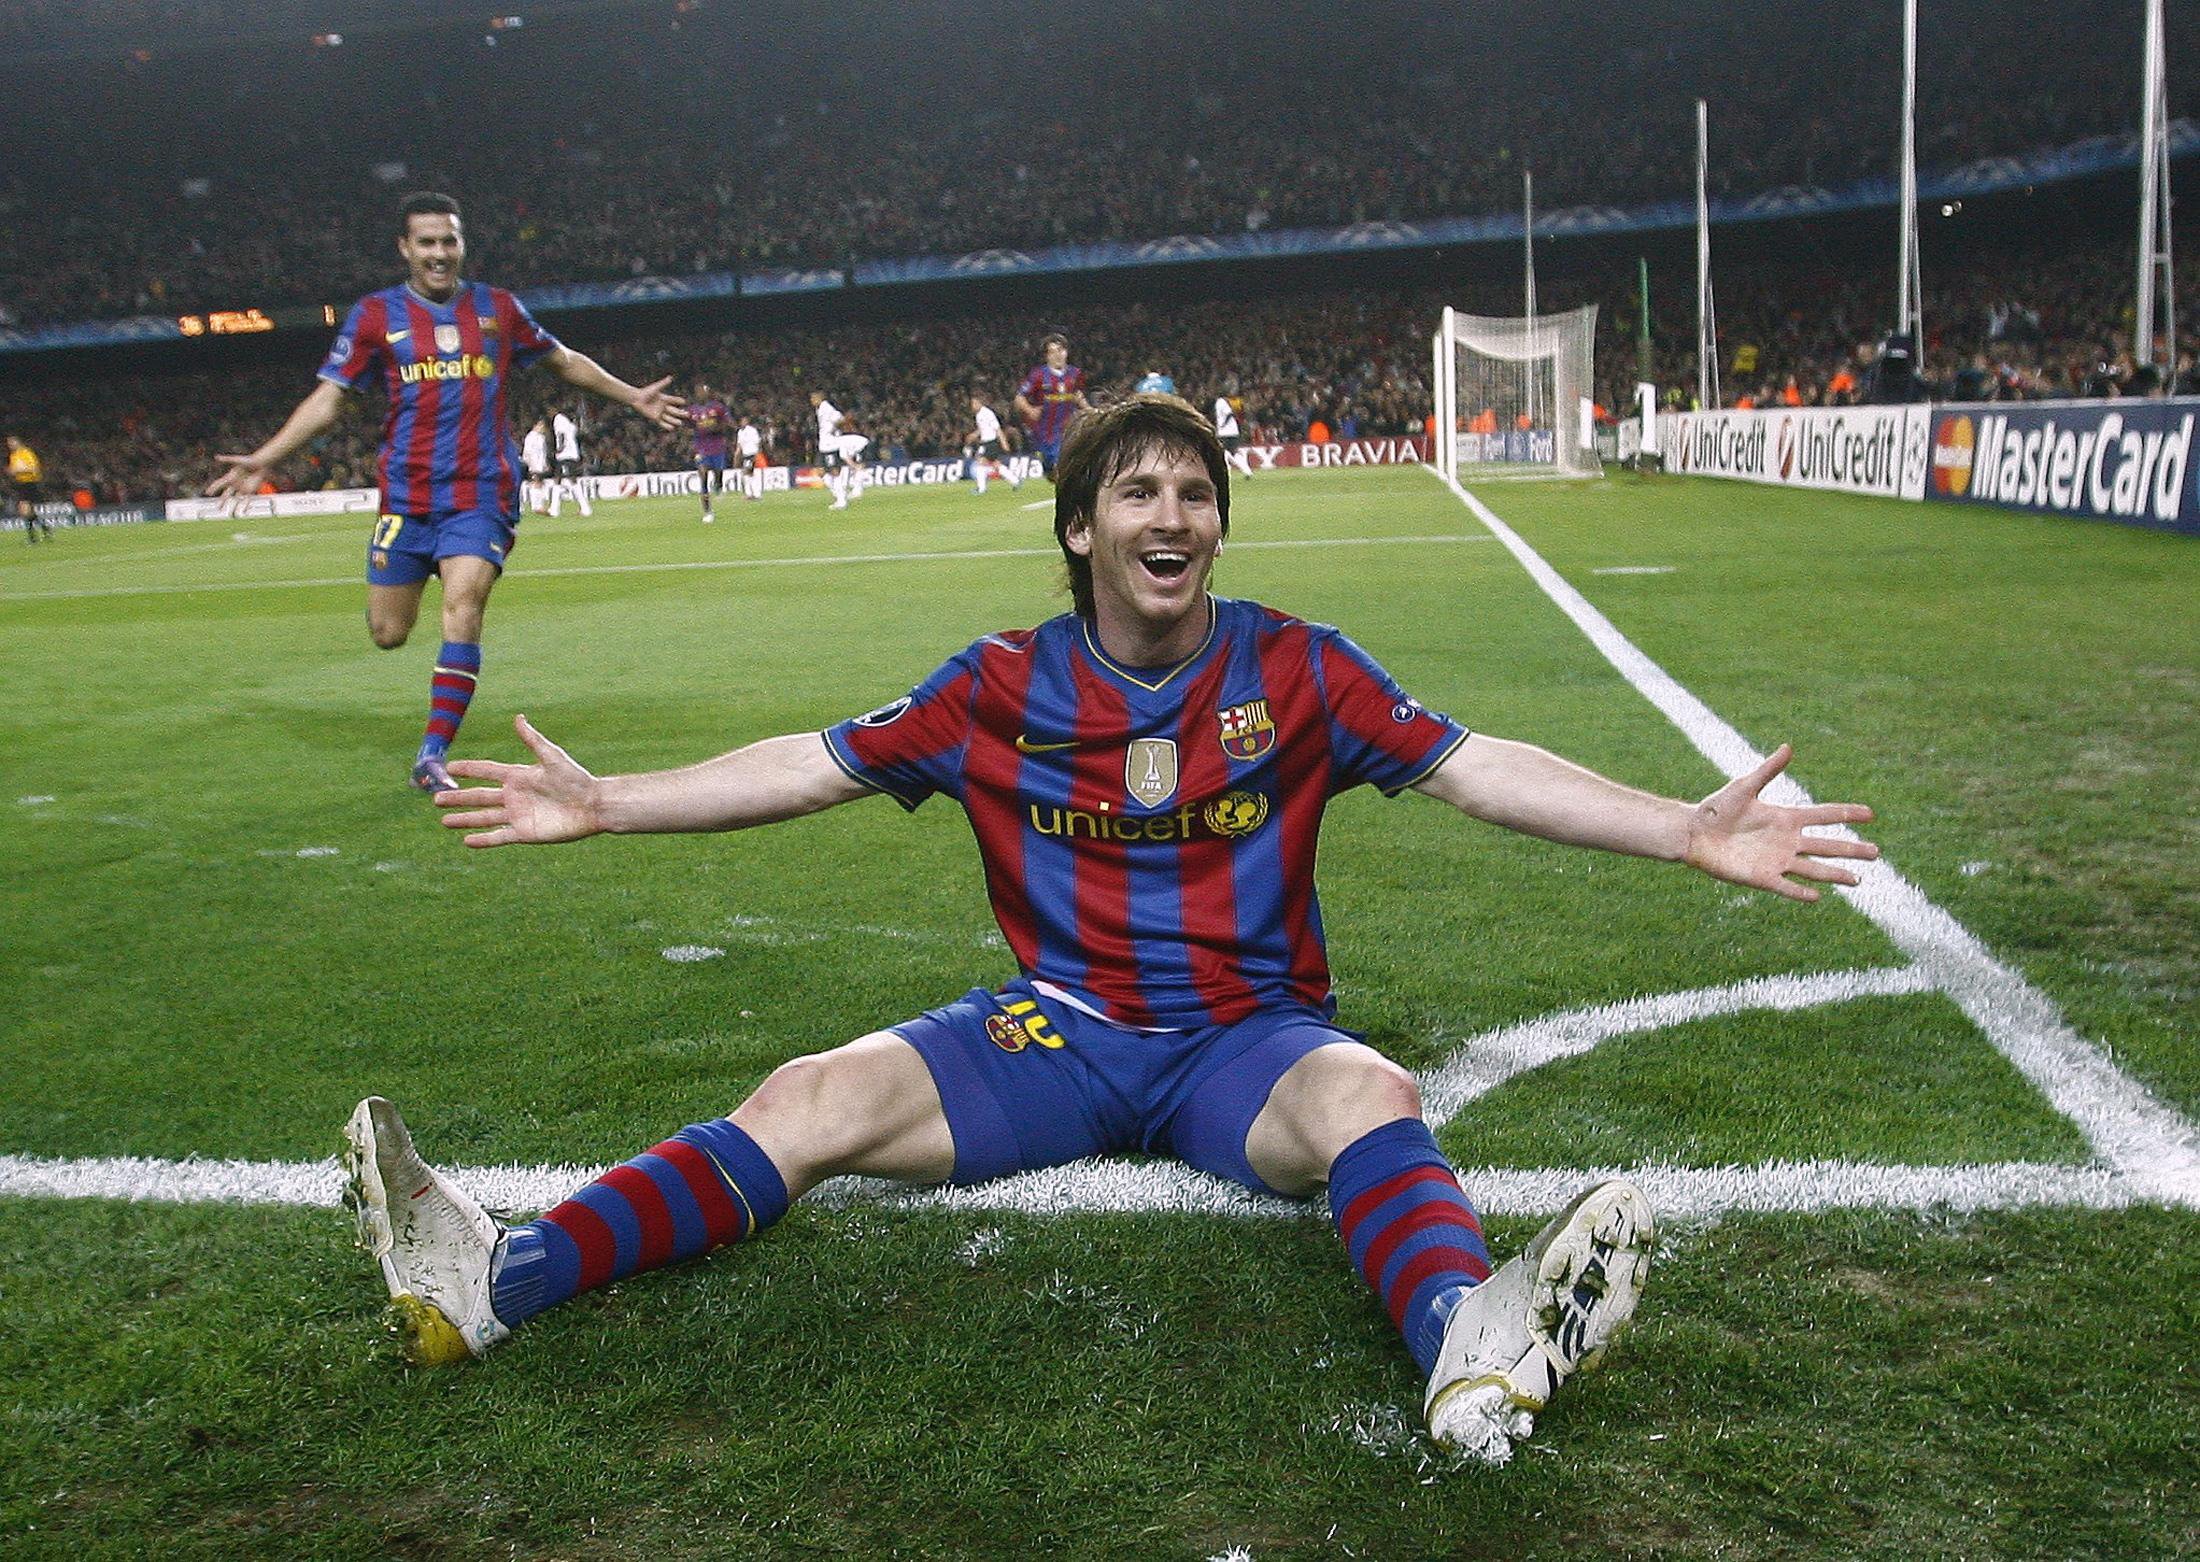 In 2010, Lionel Messi scored all 4 as Barcelona beat Arsenal 4-1 at Camp Nou in the Champions League.